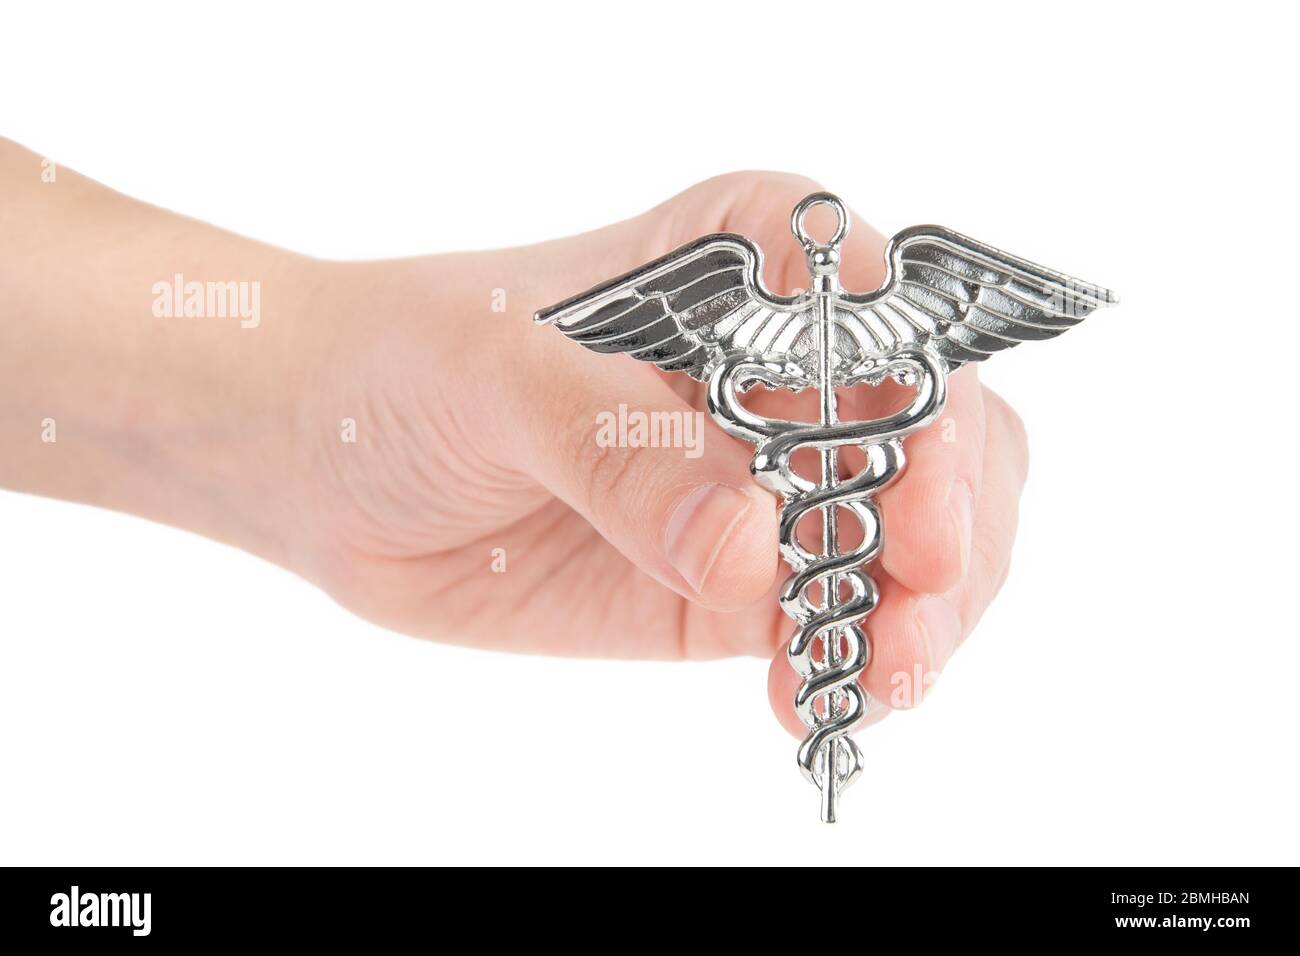 Female hand holds a two-snake design Hermes symbol. Caduceus as a symbol of medicine. Close-up shot, isolated on white. Stock Photo